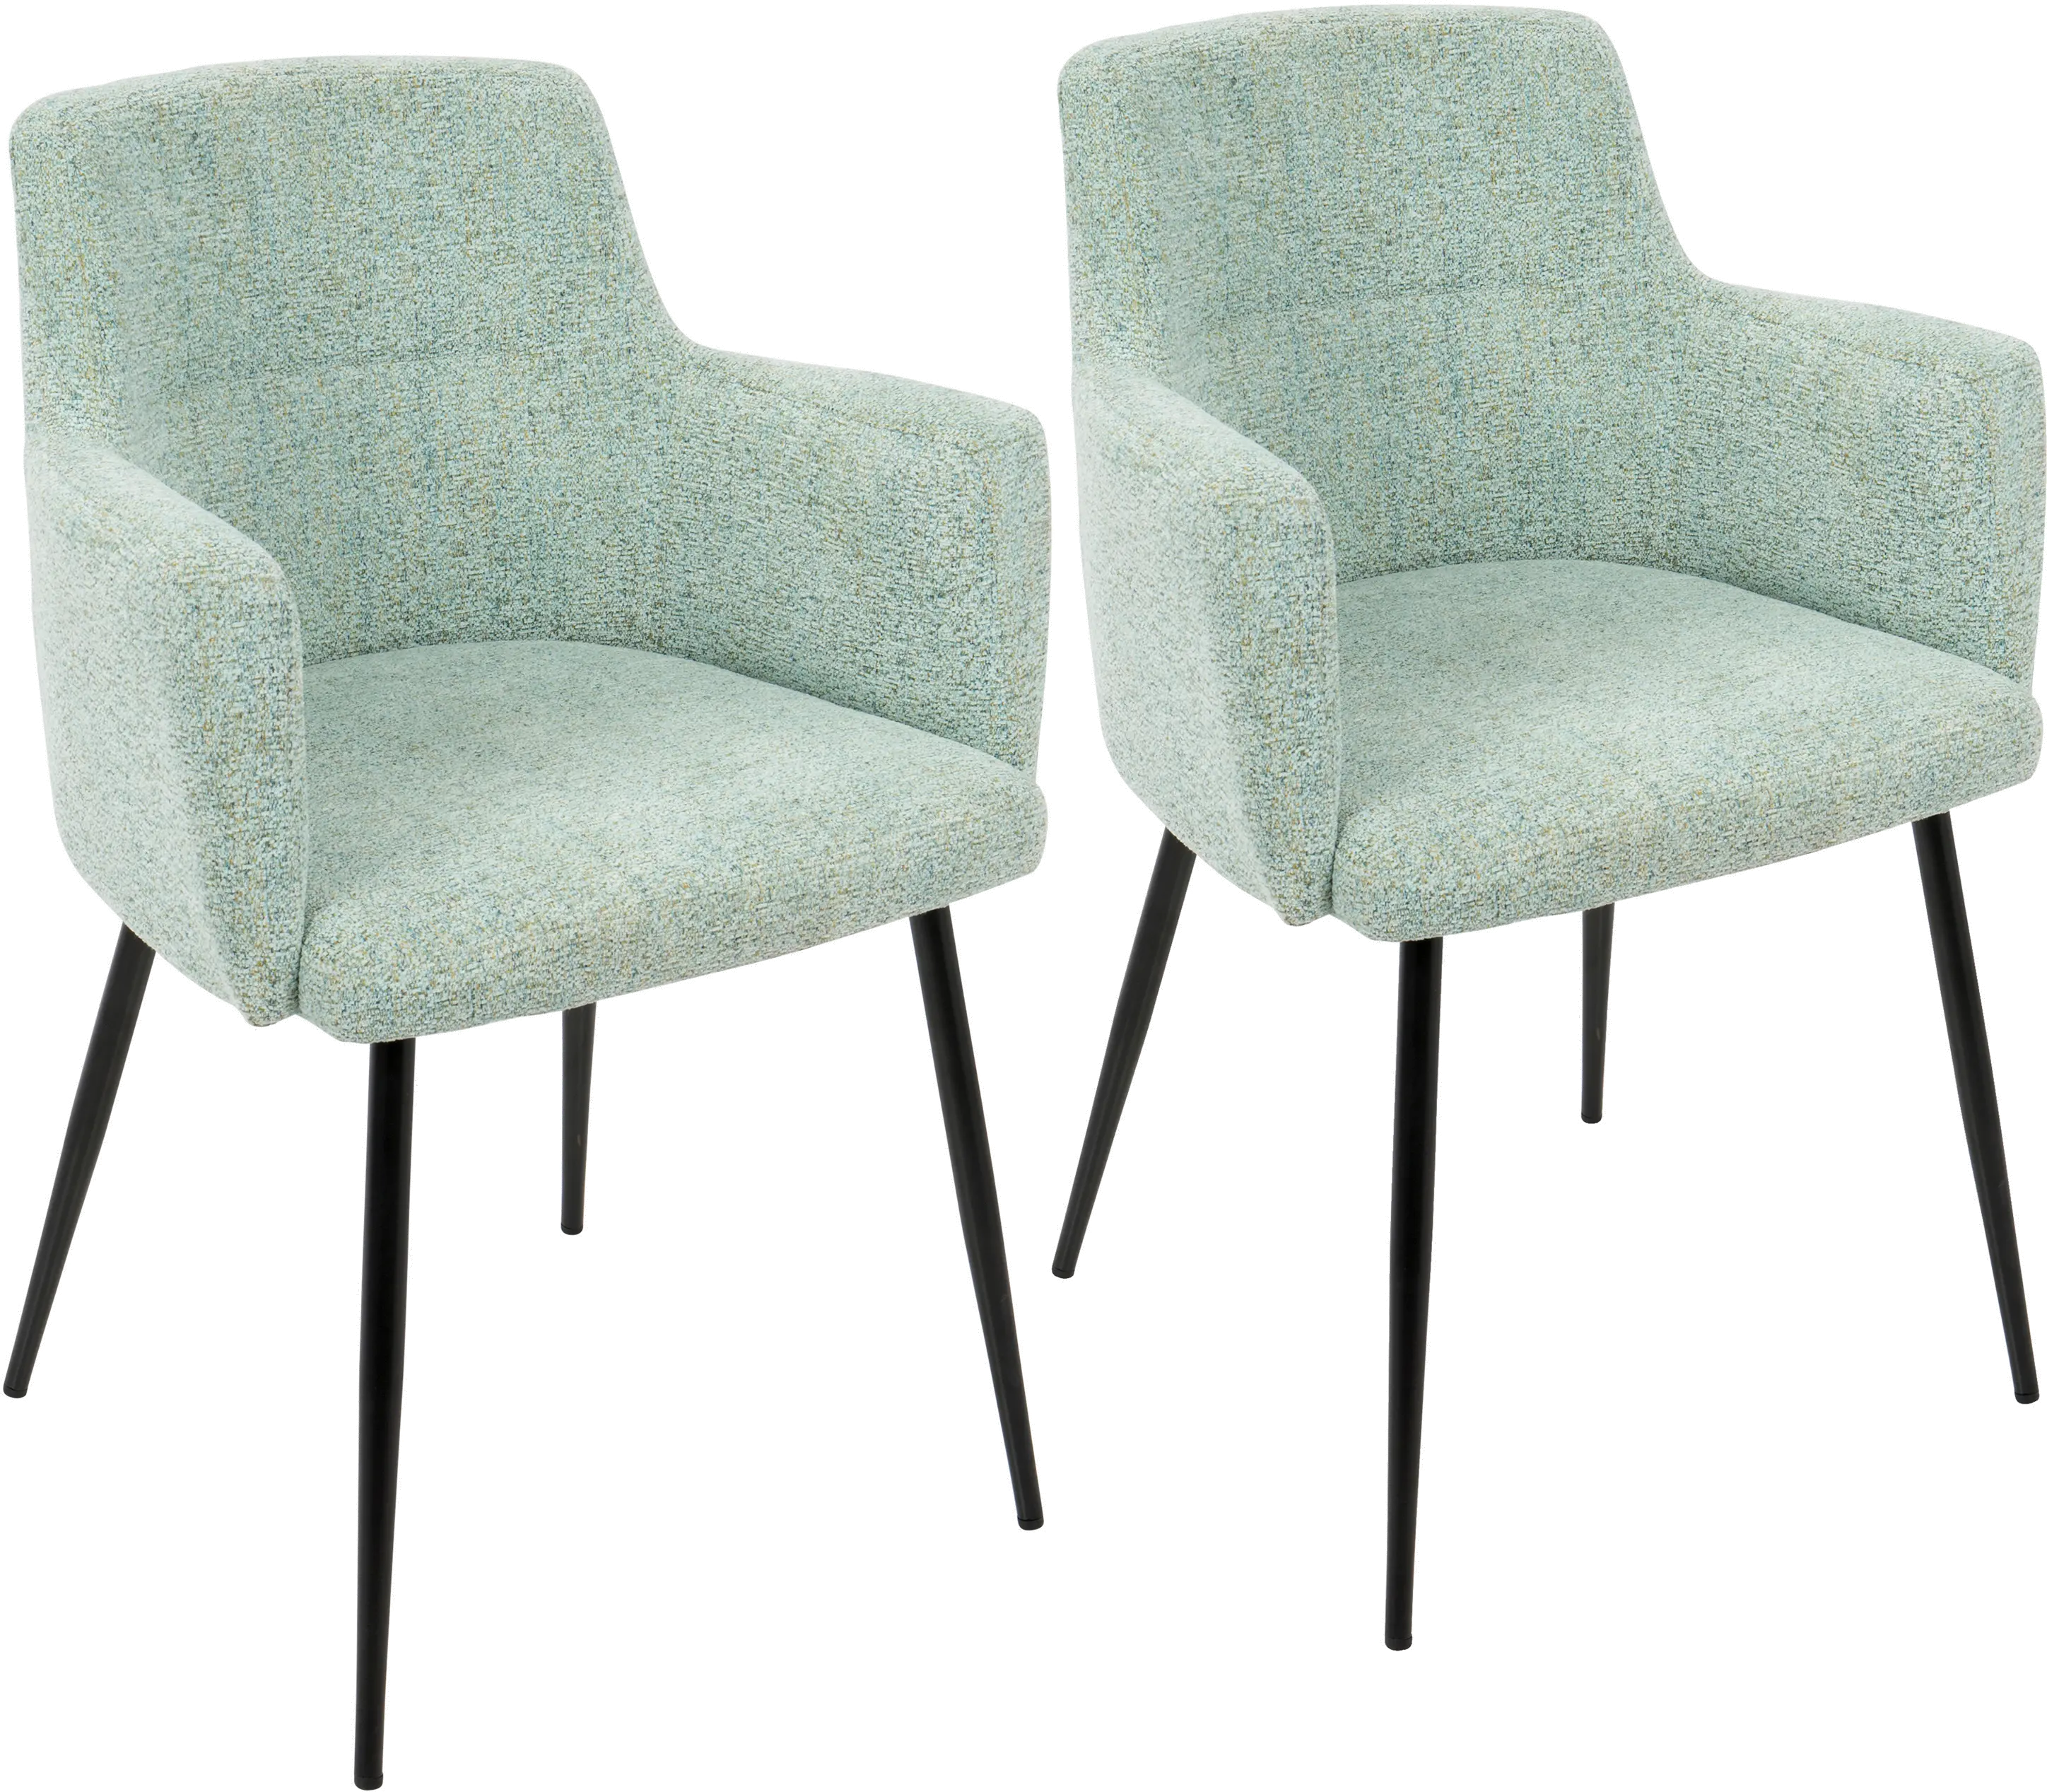 Andrew Contemporary Green and Black Dining Room Chair, Set of 2